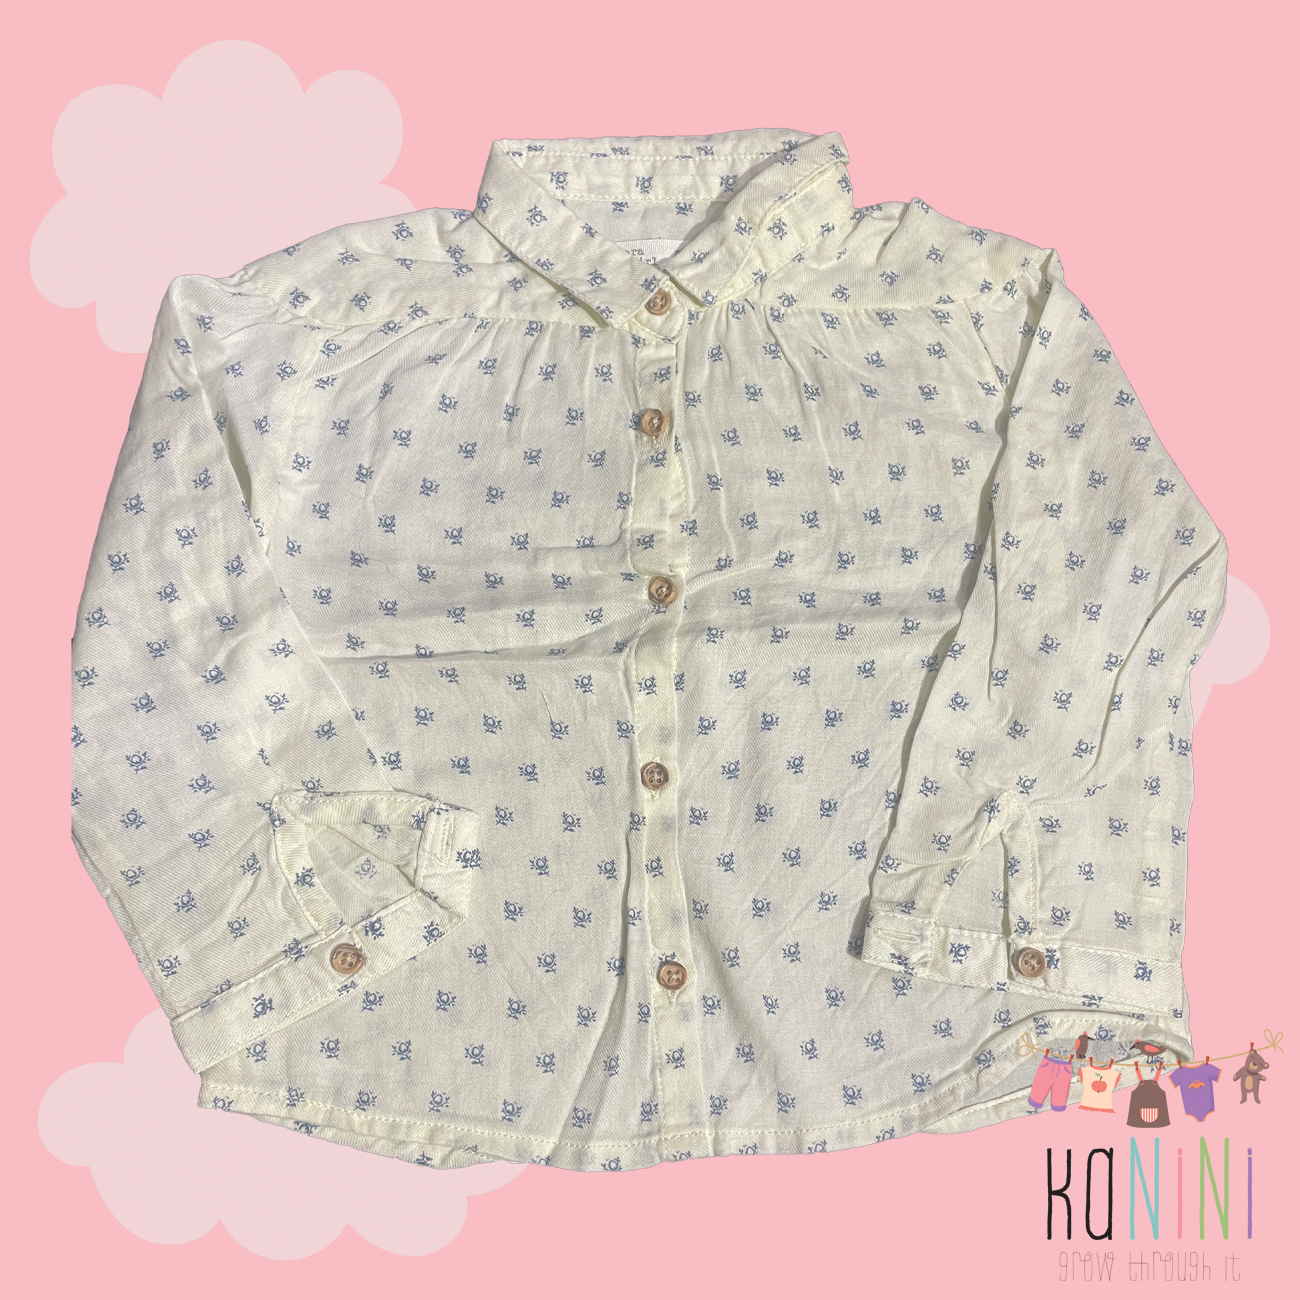 Featured image for “ZARA 12 - 18 Months Girls Formal Collared Shirt”